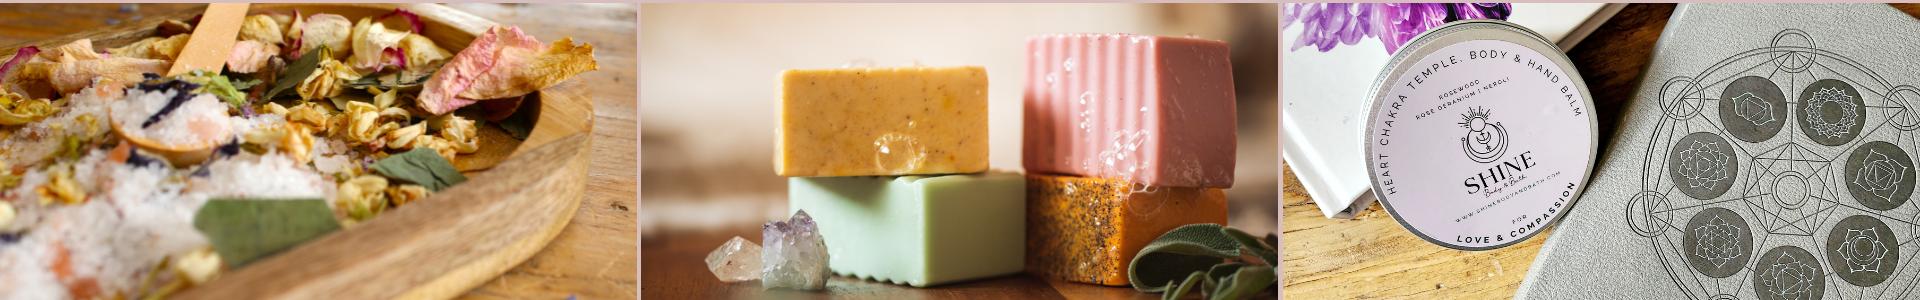 Trio of images of Shine Body & Bath products | Shine Body & Bath | For stockists